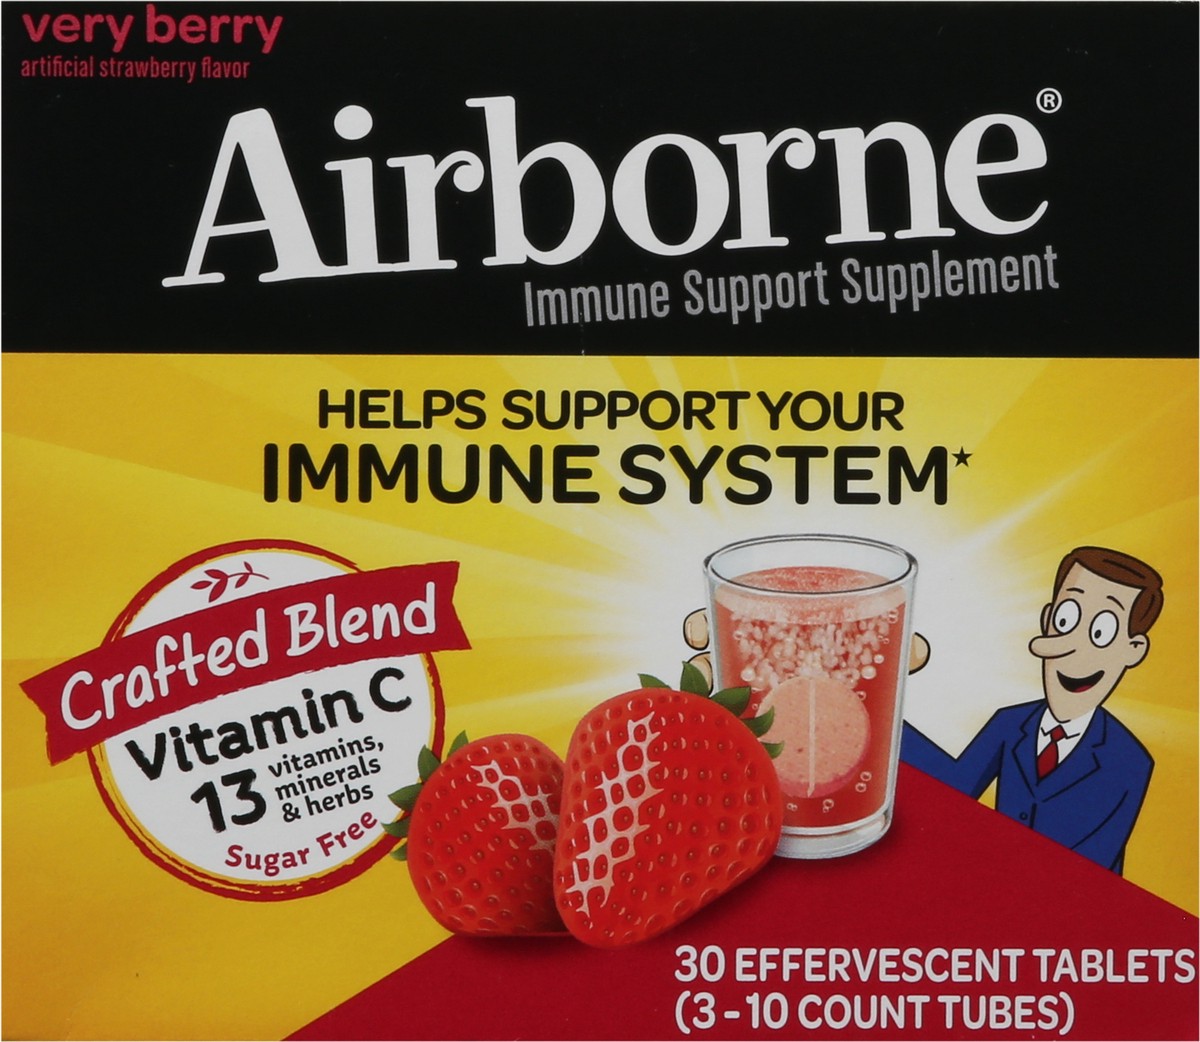 slide 6 of 14, Airborne Very Berry Effervescent Tablets, 30 count - 1000mg of Vitamin C, Immune Support Supplement, 30 ct